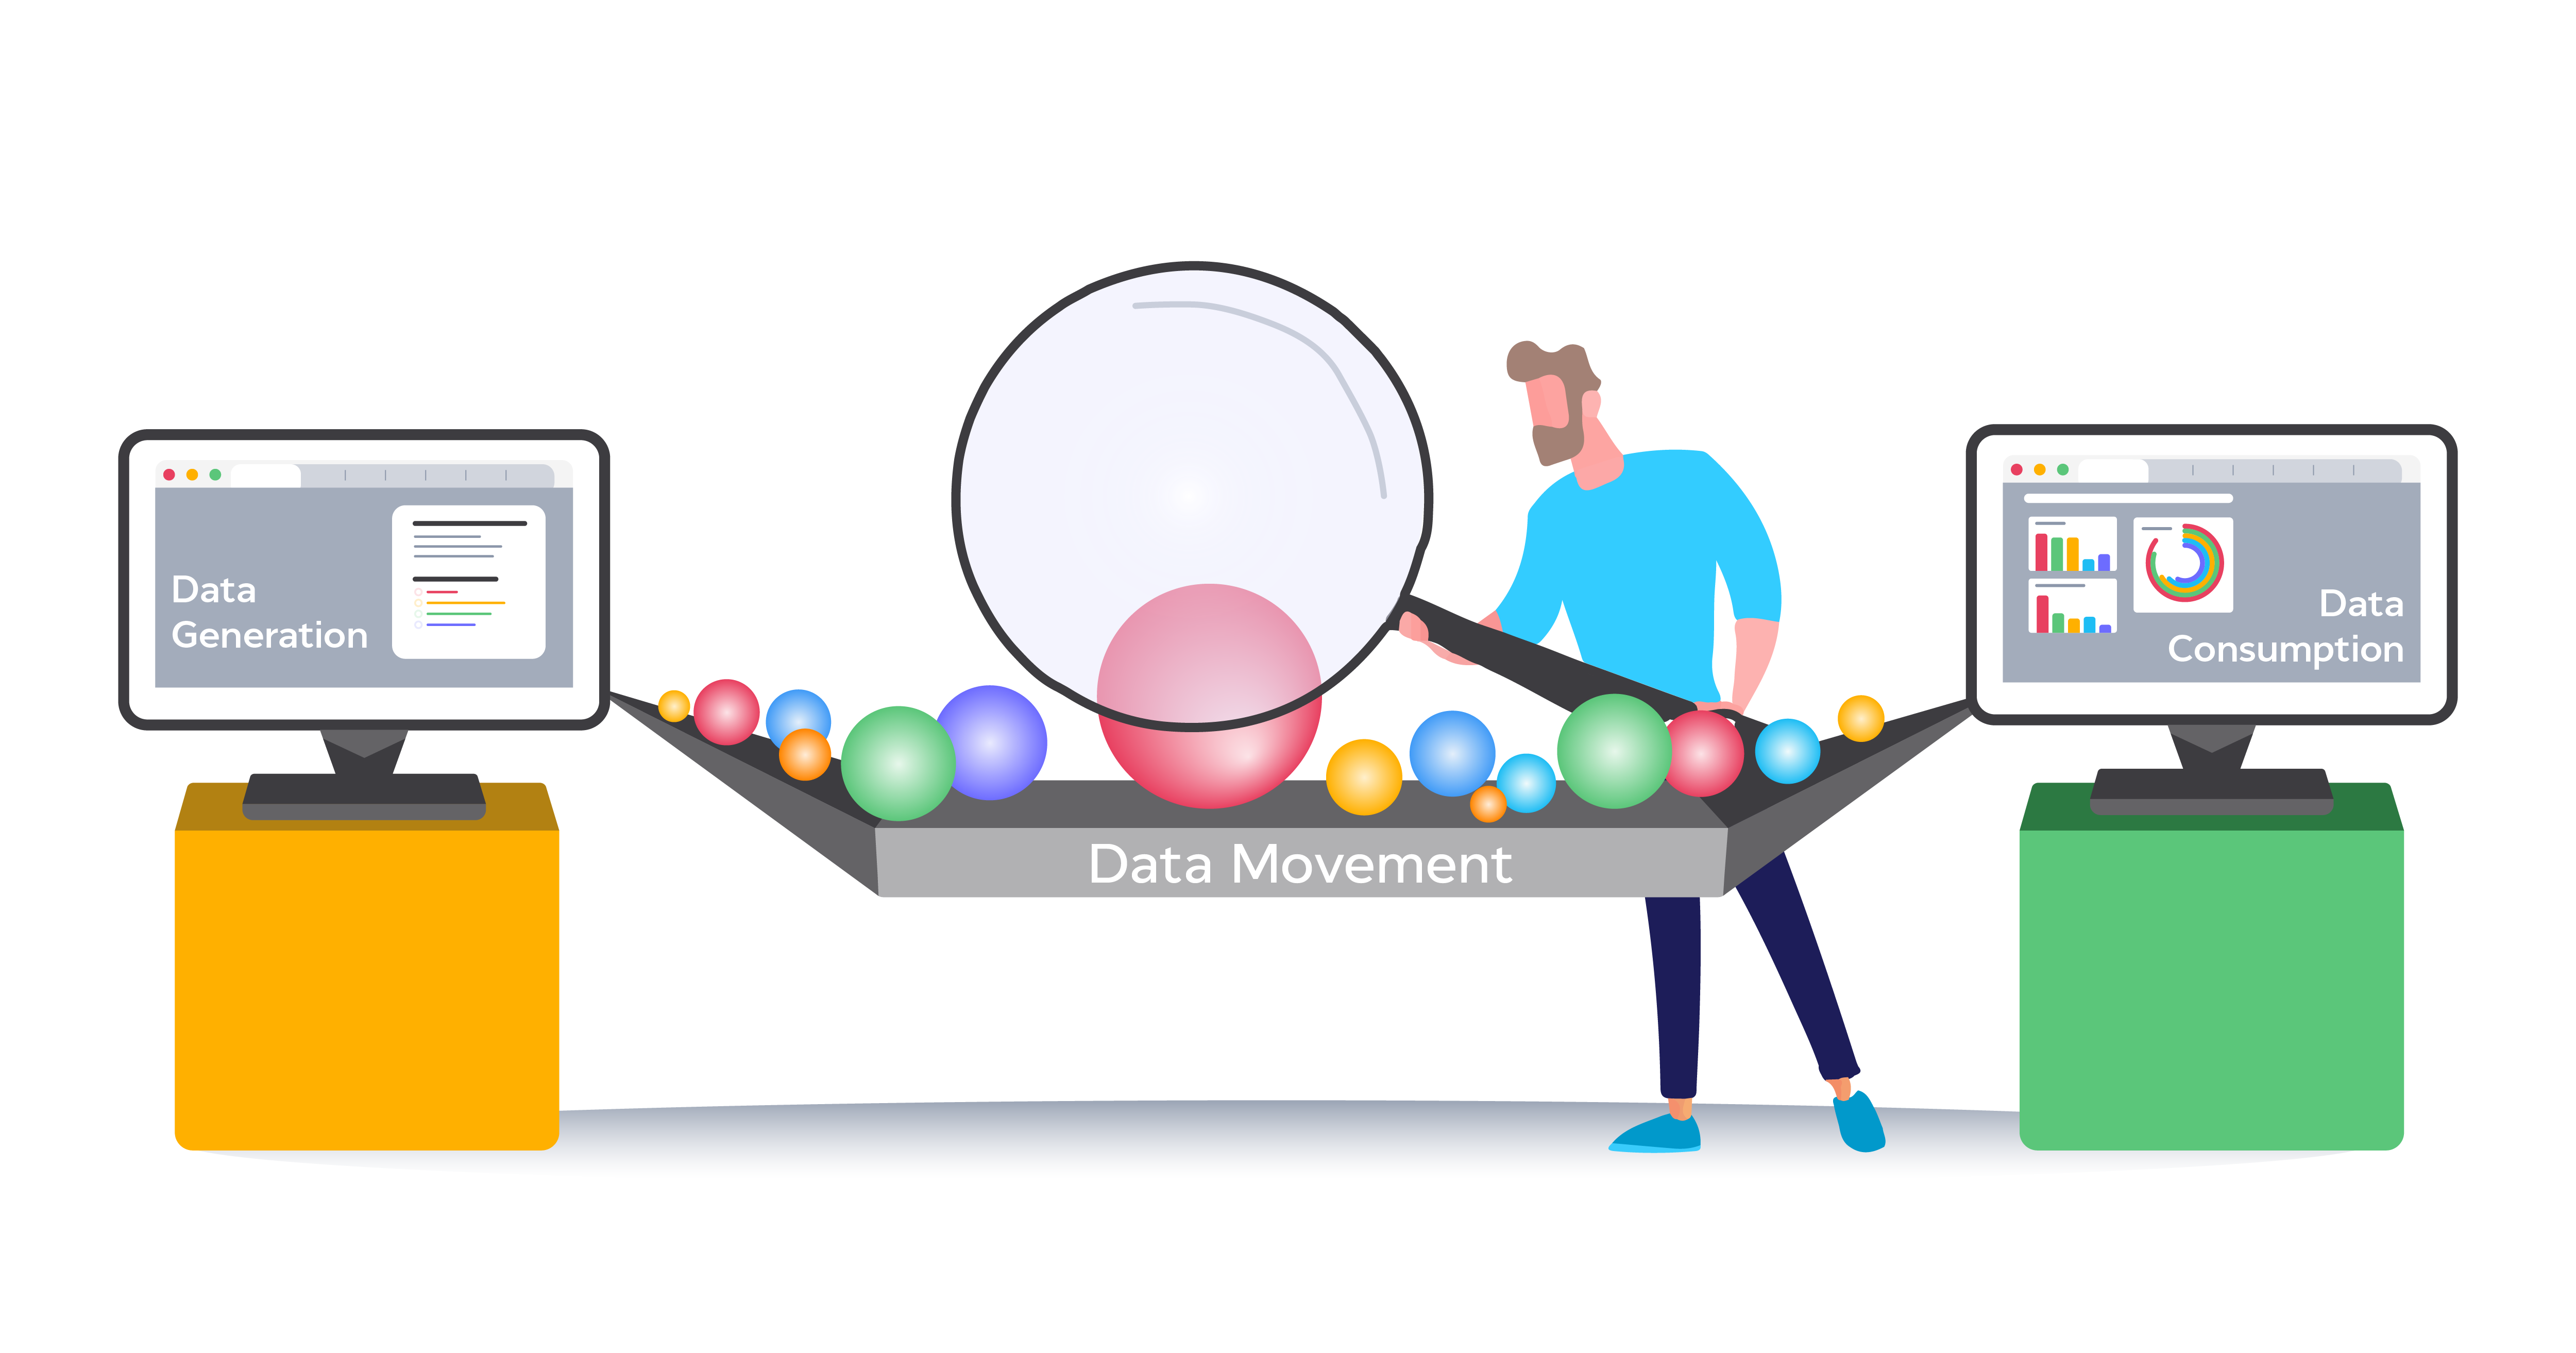 Data movement stages: Data Generation to Data Consumption